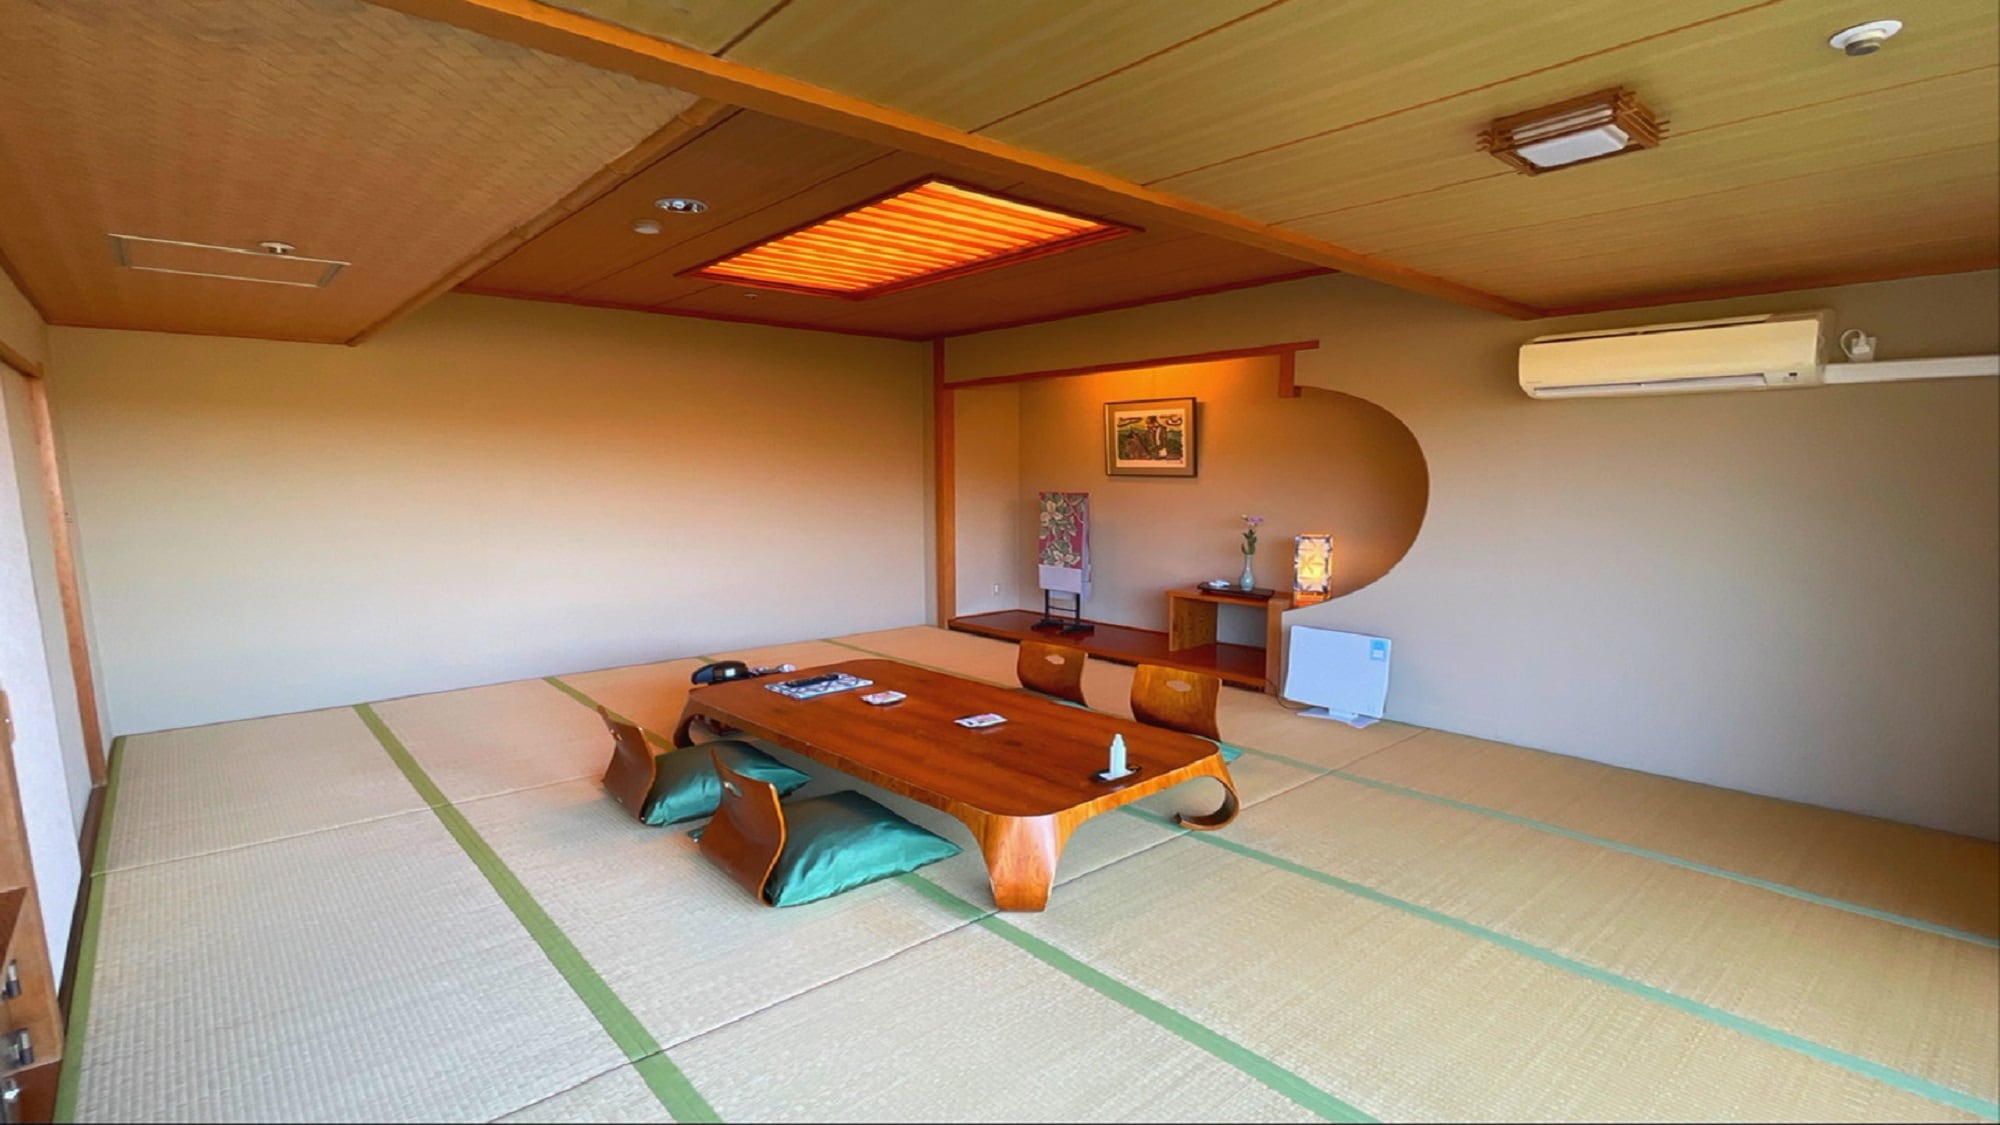 Special room "Muko" Japanese-style room 15 tatami mats facing the wall